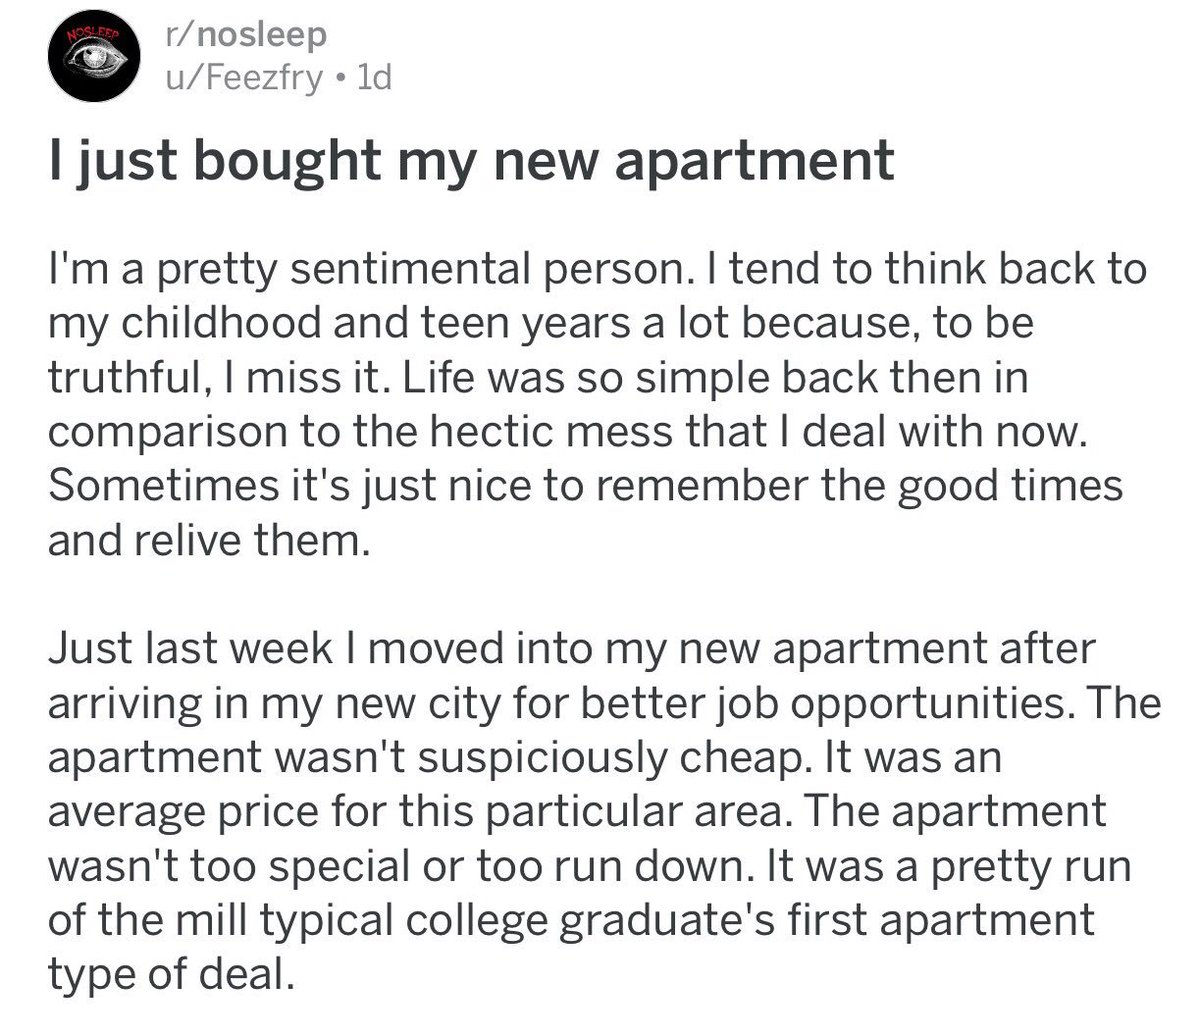 ↳ I just bought my new apartment { https://www.reddit.com/r/nosleep/comments/7wv36l/i_just_bought_my_new_apartment/}